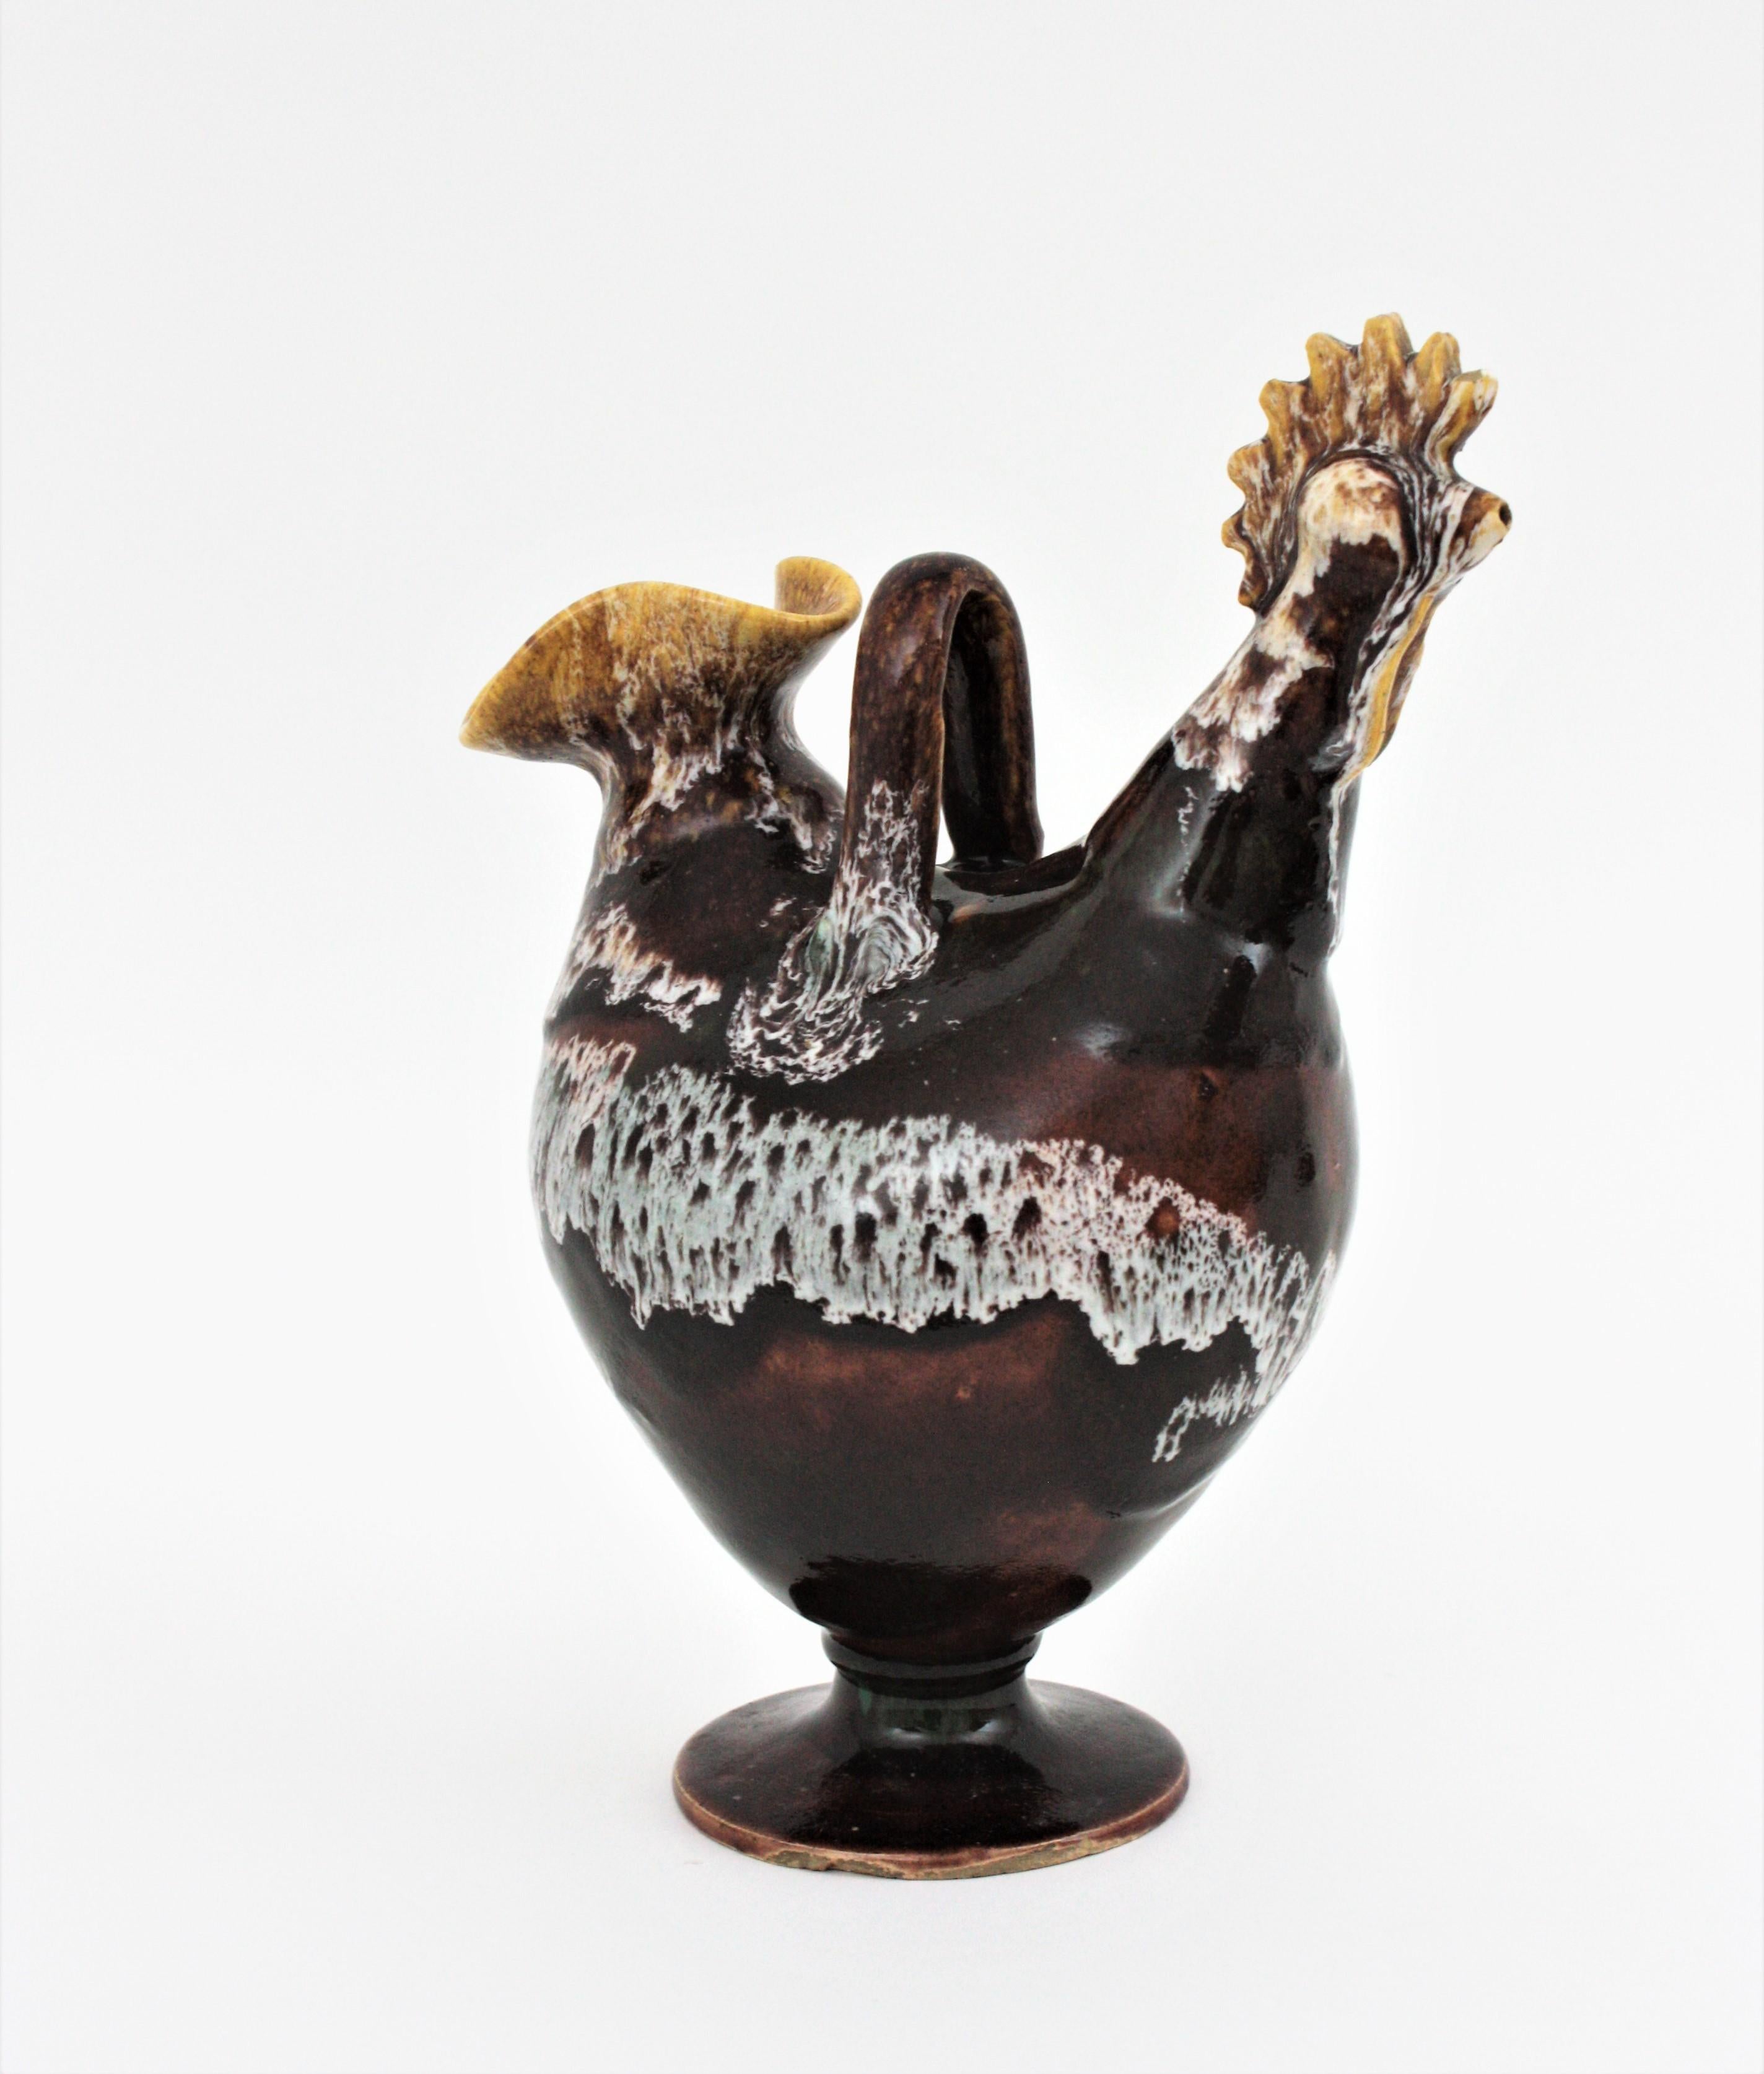 Spanish Rooster Shaped Pitcher in Brown Glazed Ceramic, 1960s For Sale 1